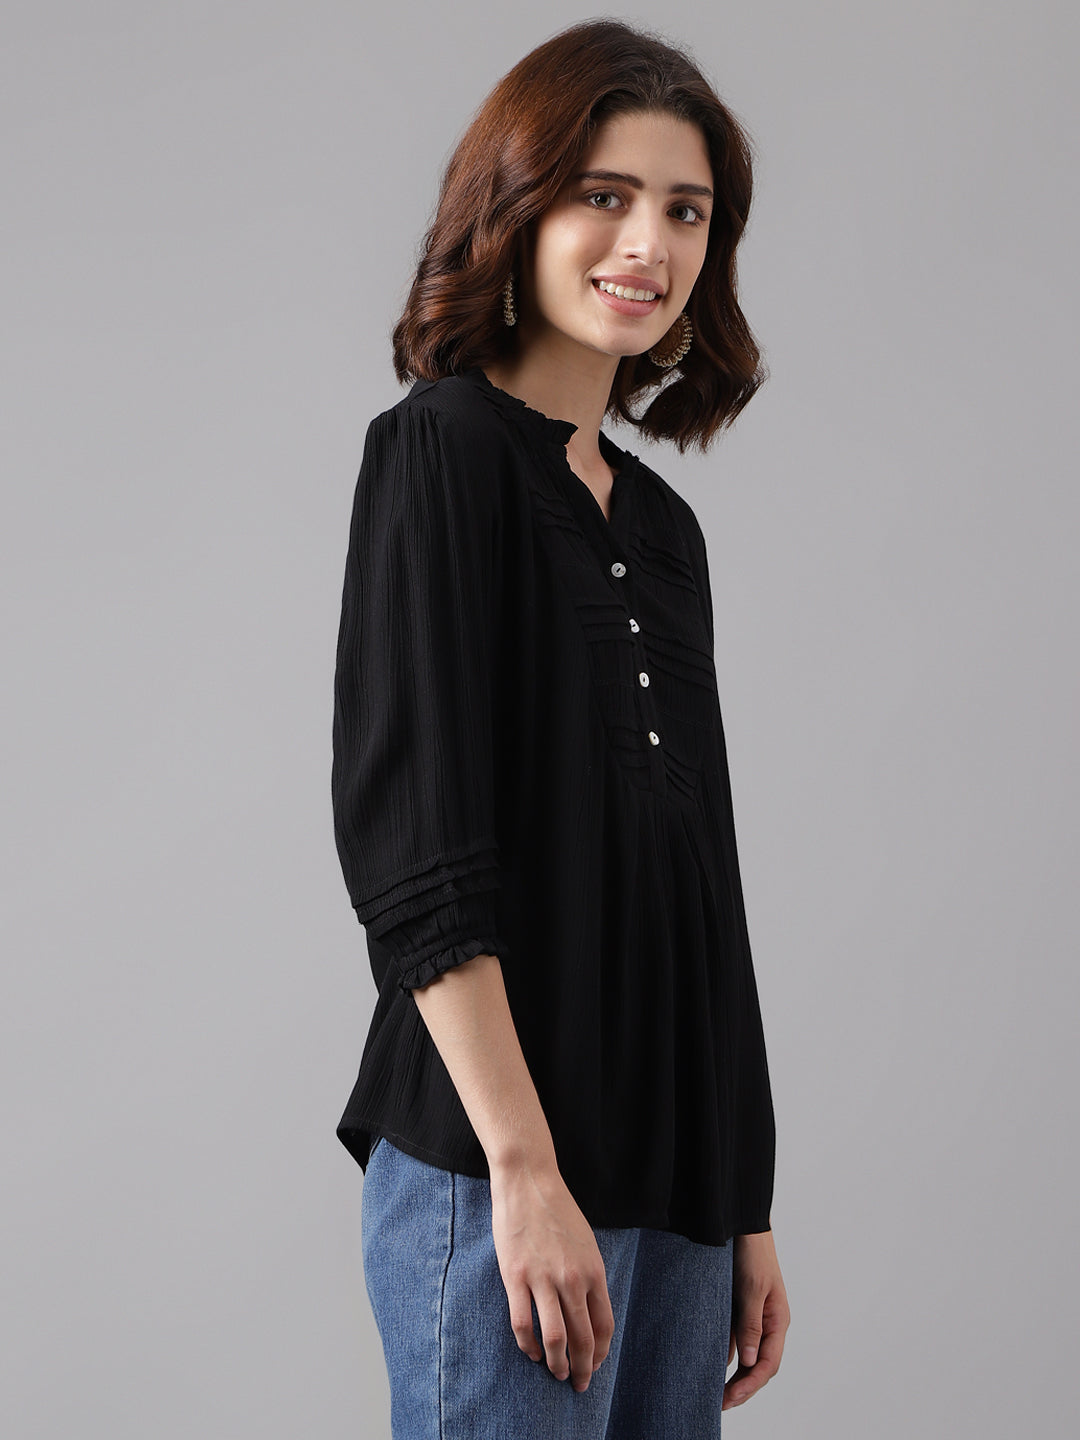 Black 3/4 Sleeve Solid Straight Tunic Tops For Women & Girls